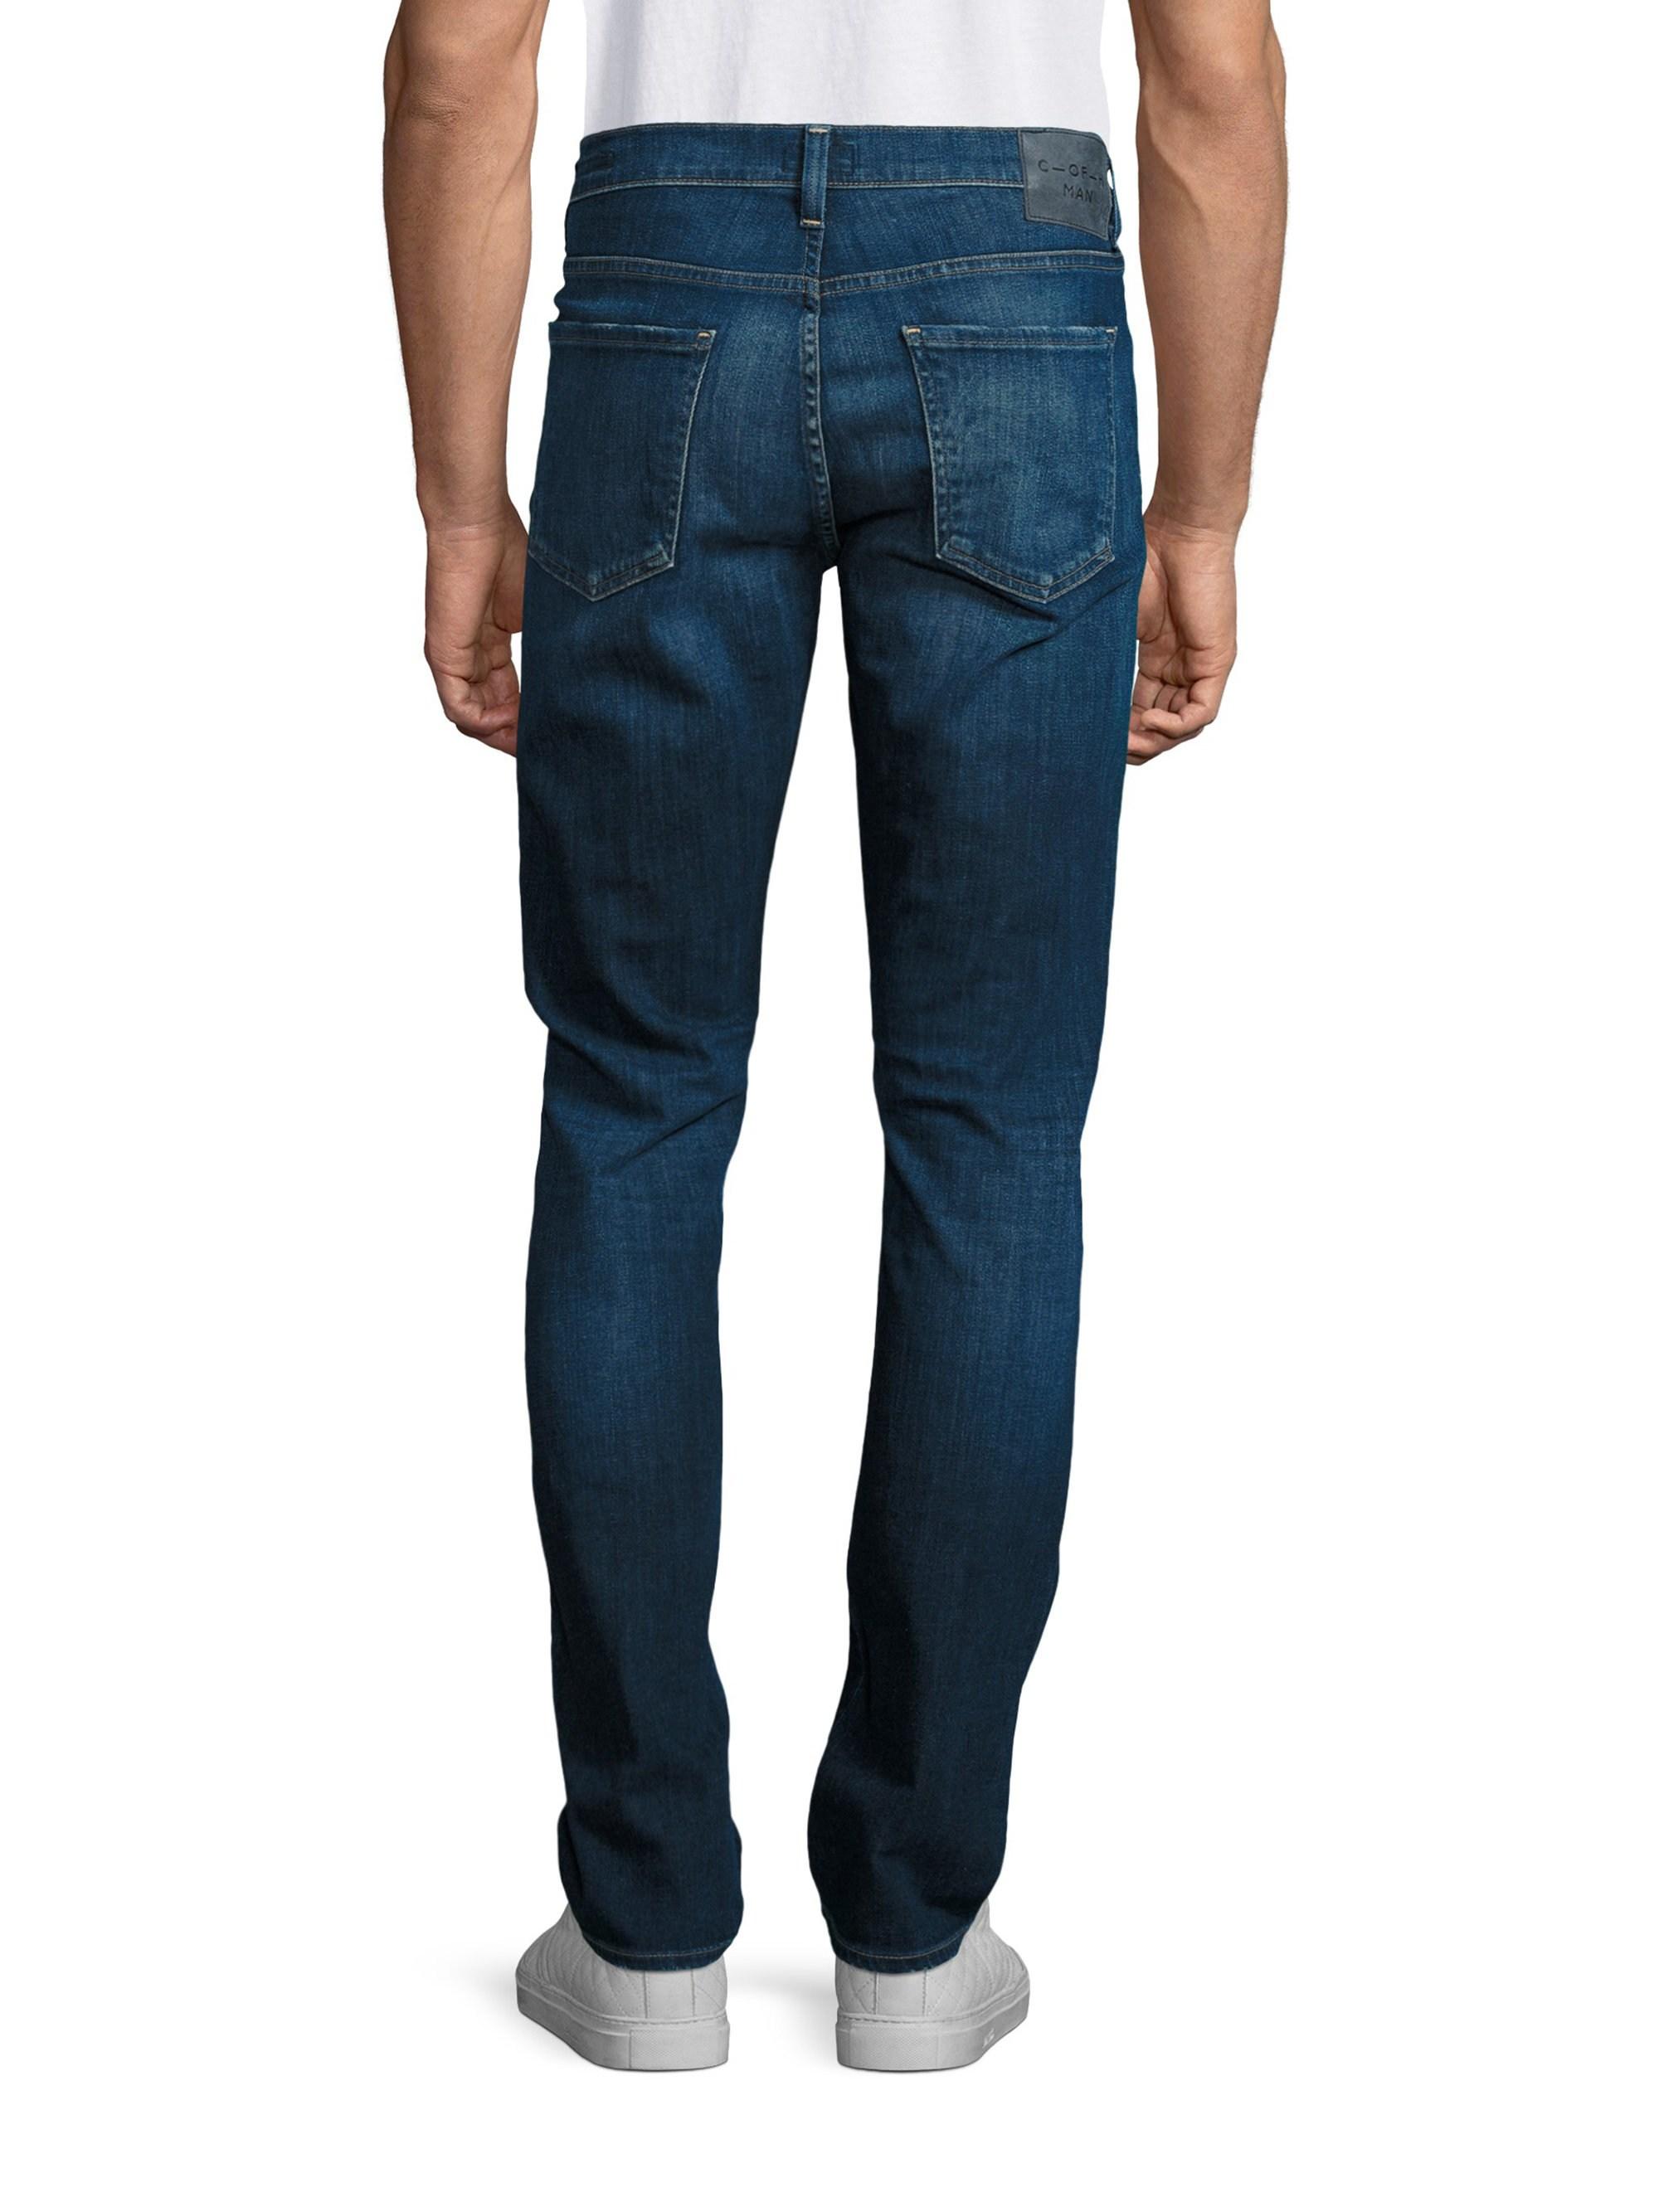 Citizens of Humanity Denim Gage Classic Fit Jeans in Blue for Men - Lyst